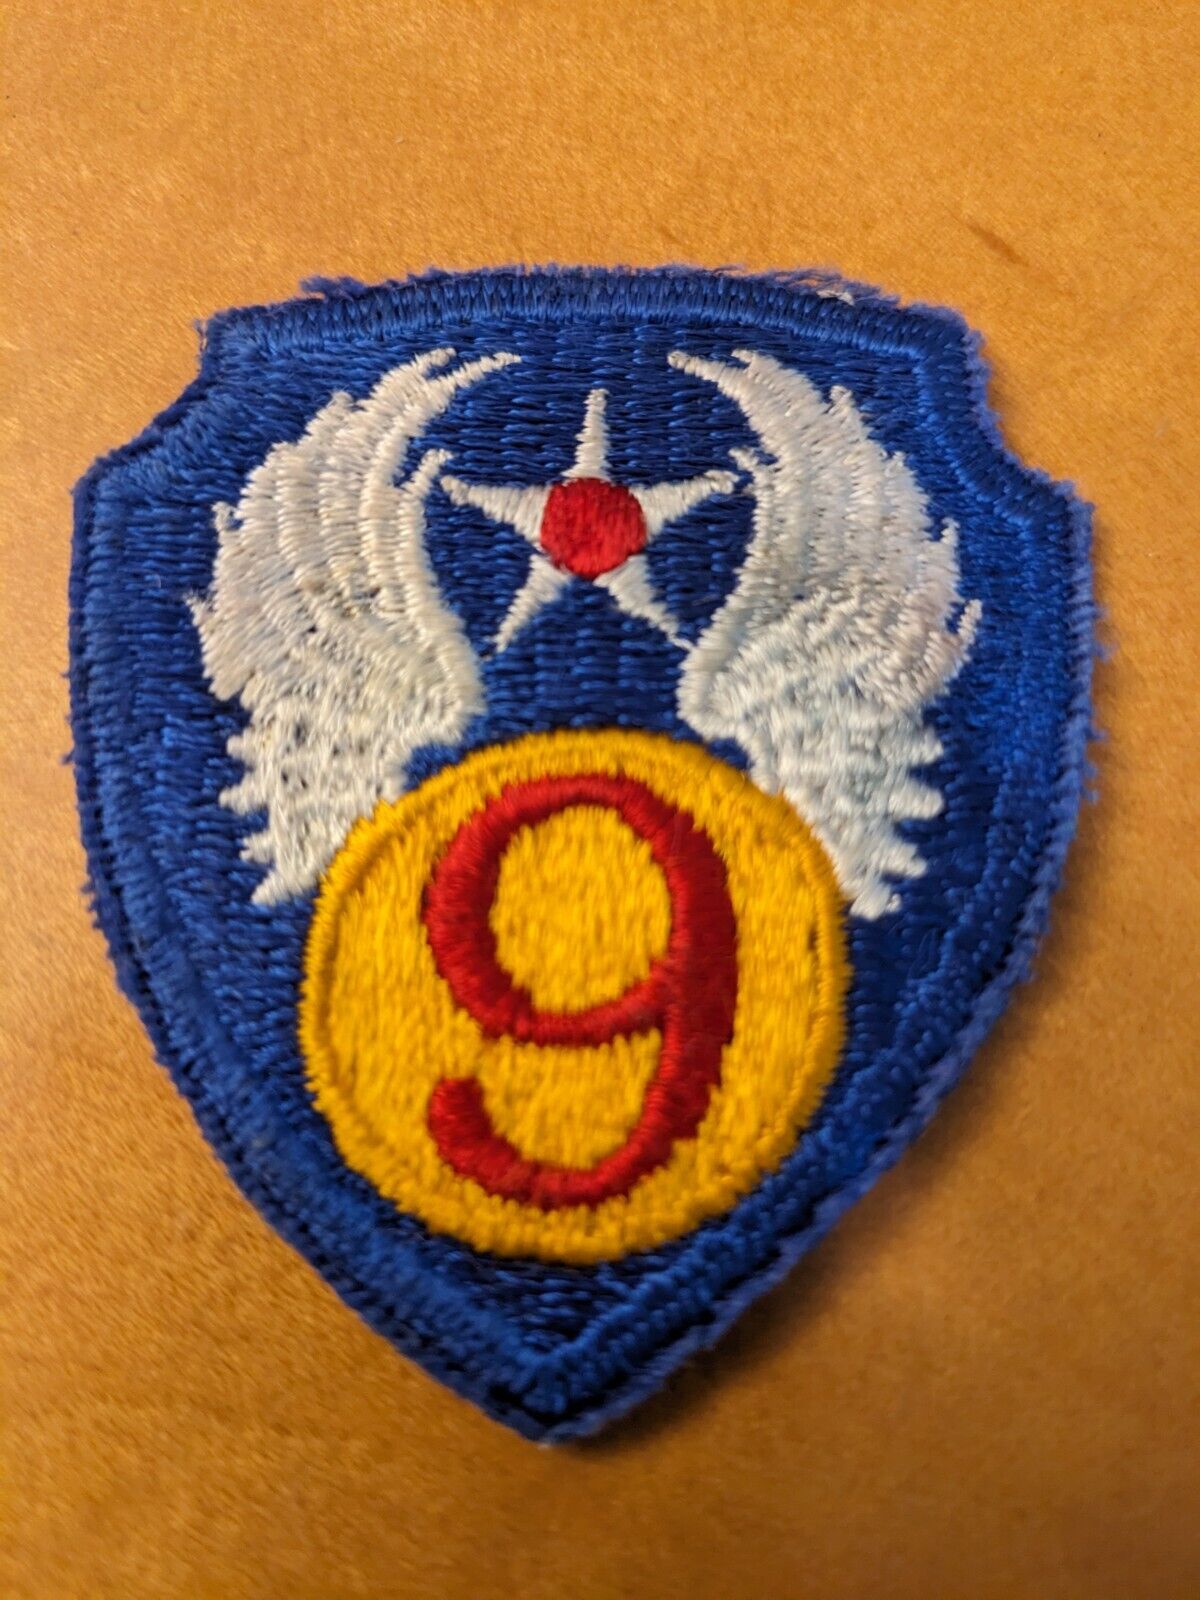 9TH AIR FORCE USAF STAR WINGS SHIELD MILITARY BLUE EMBROIDERED PATCH